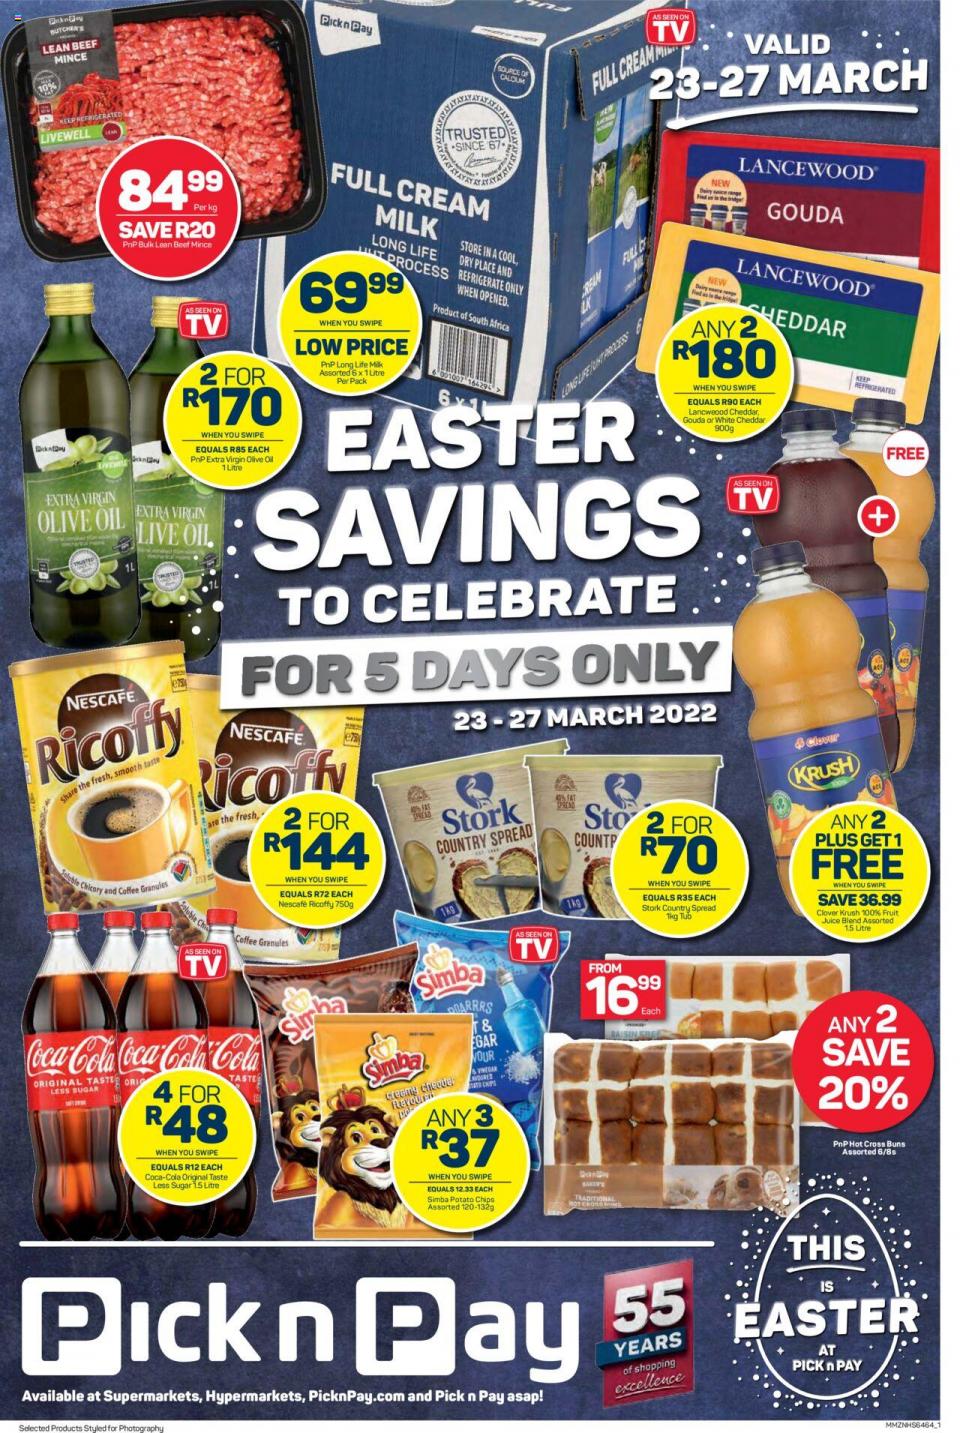 Pick n Pay Specials Easter Savings 23 – 27 March 2022